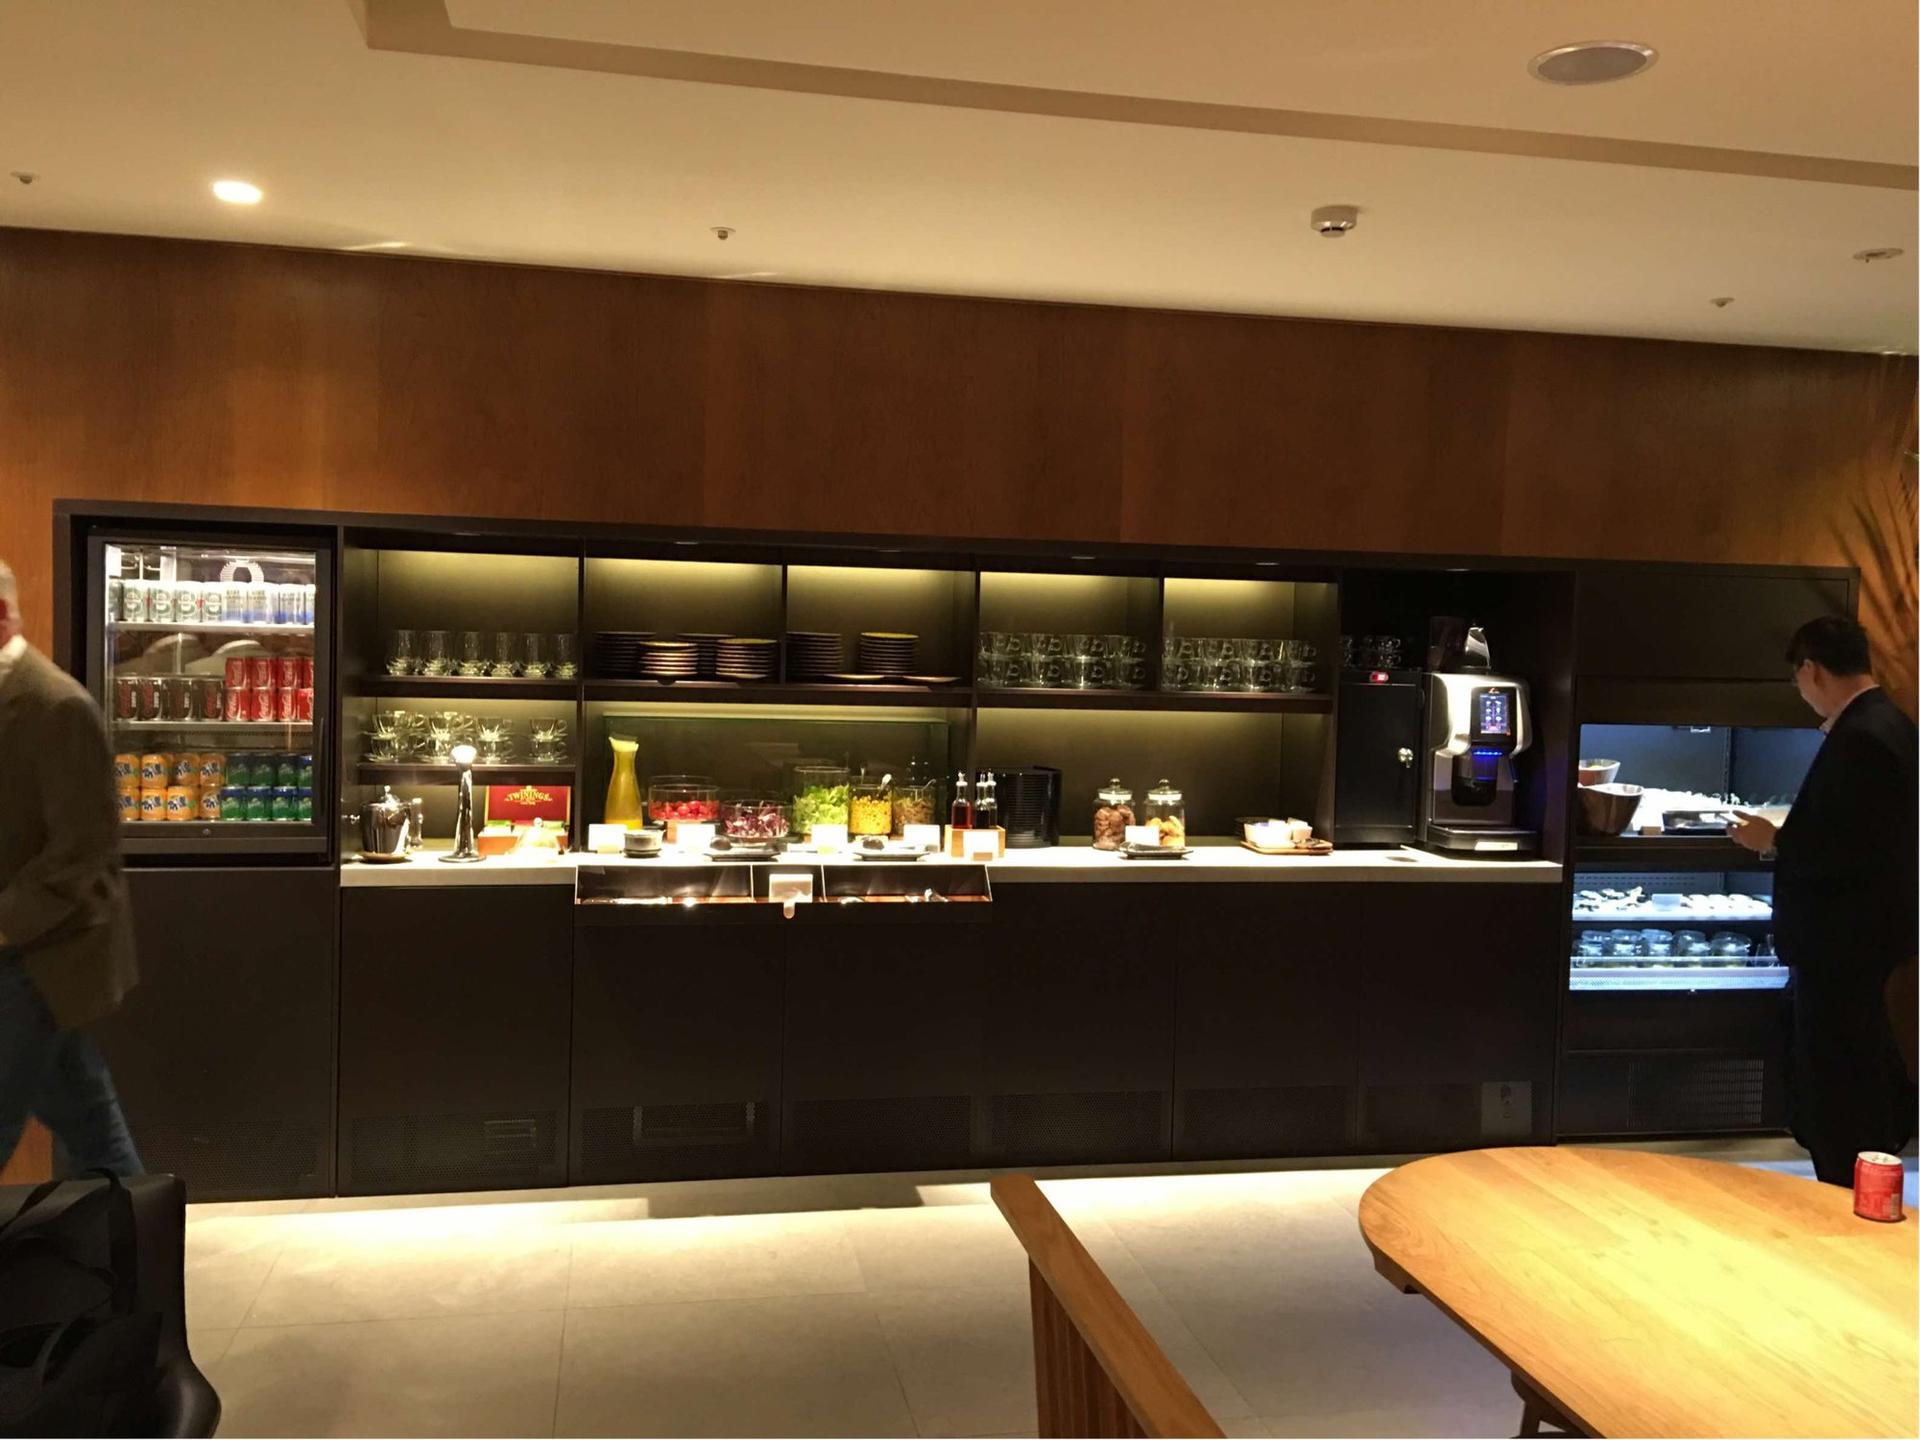 Cathay Pacific Lounge image 8 of 37